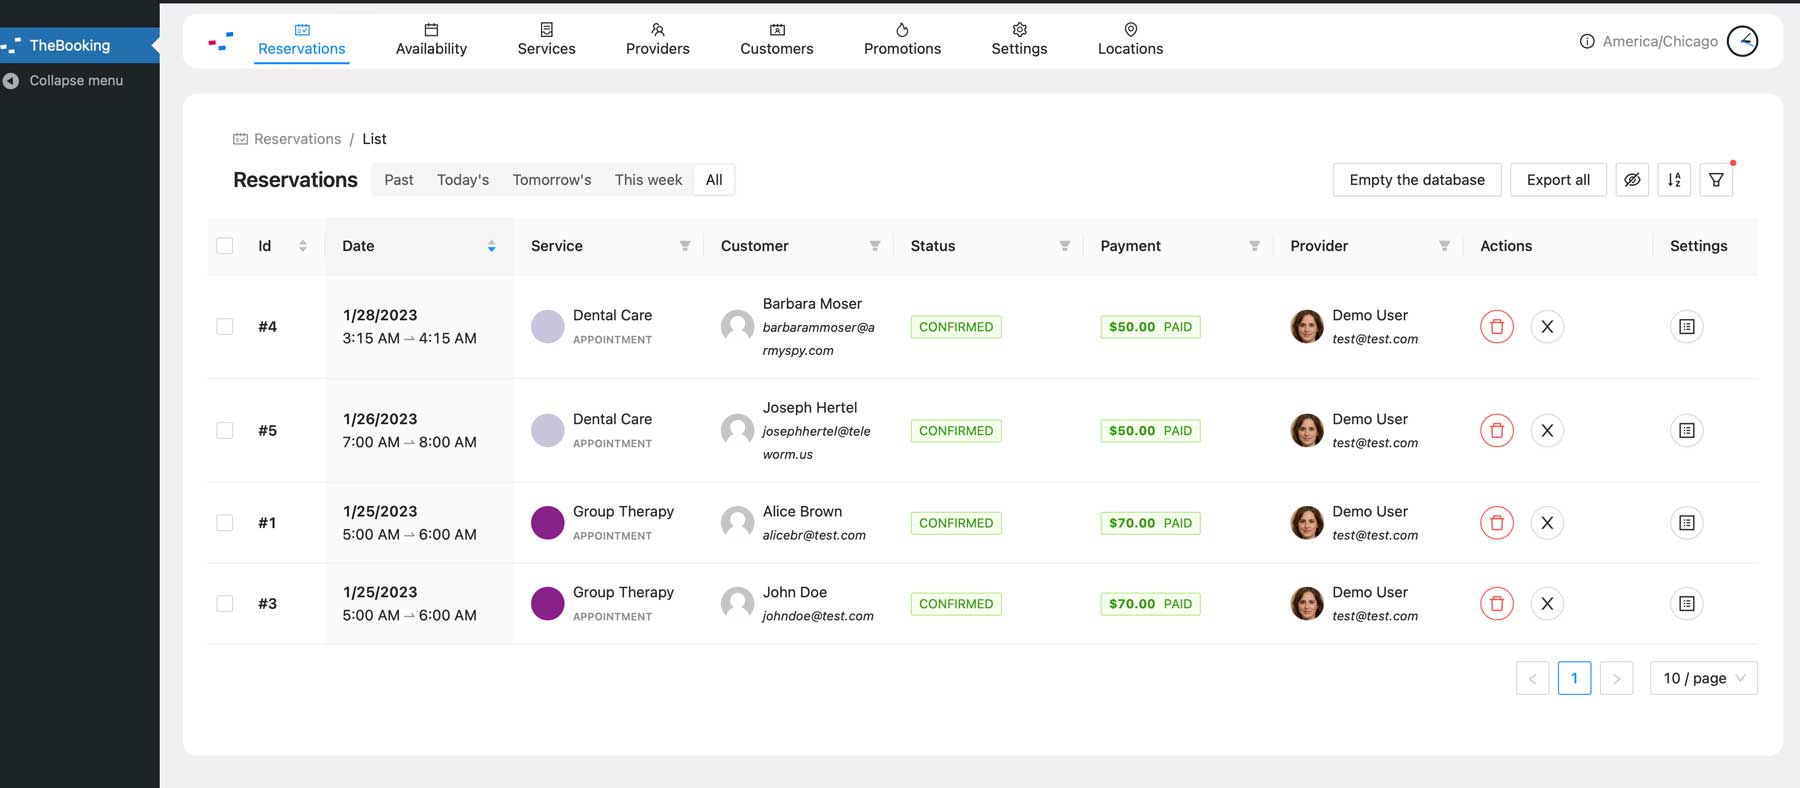 The Team Booking interface